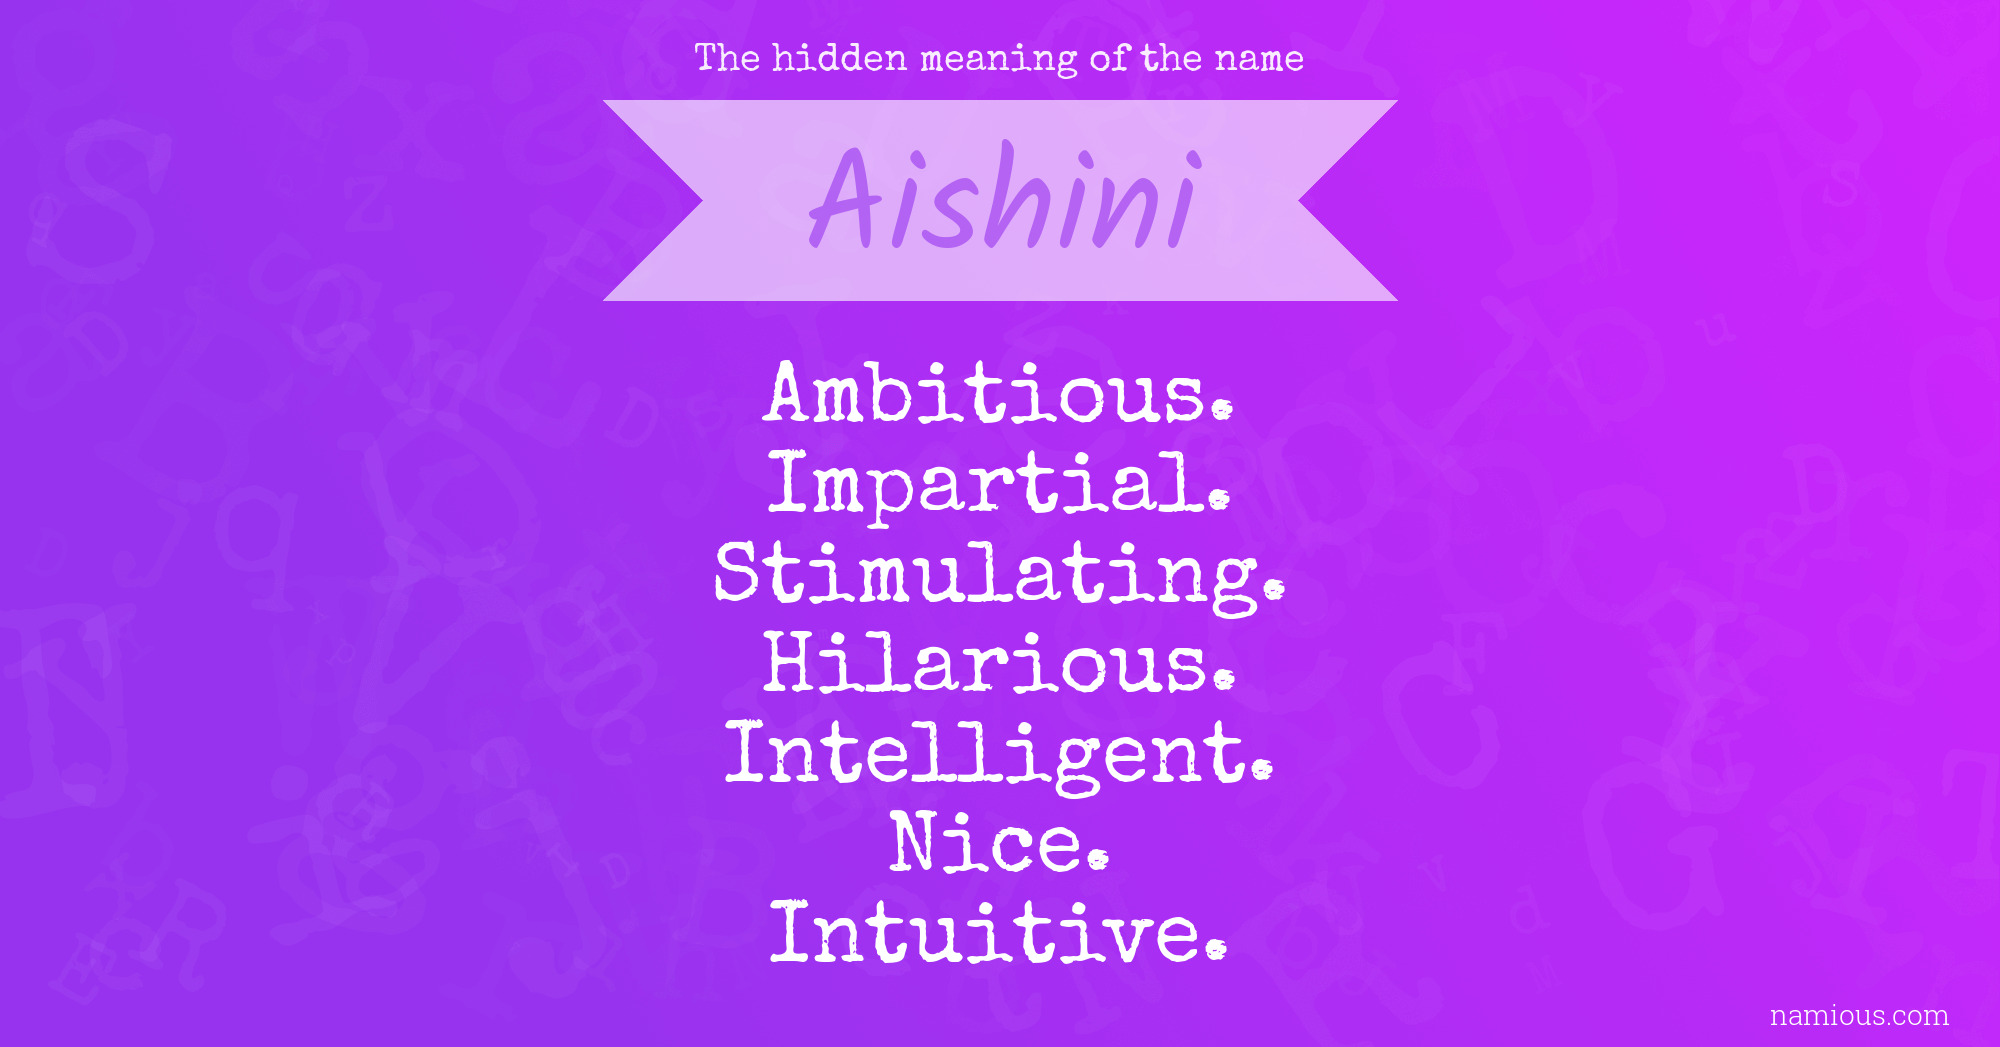 The hidden meaning of the name Aishini